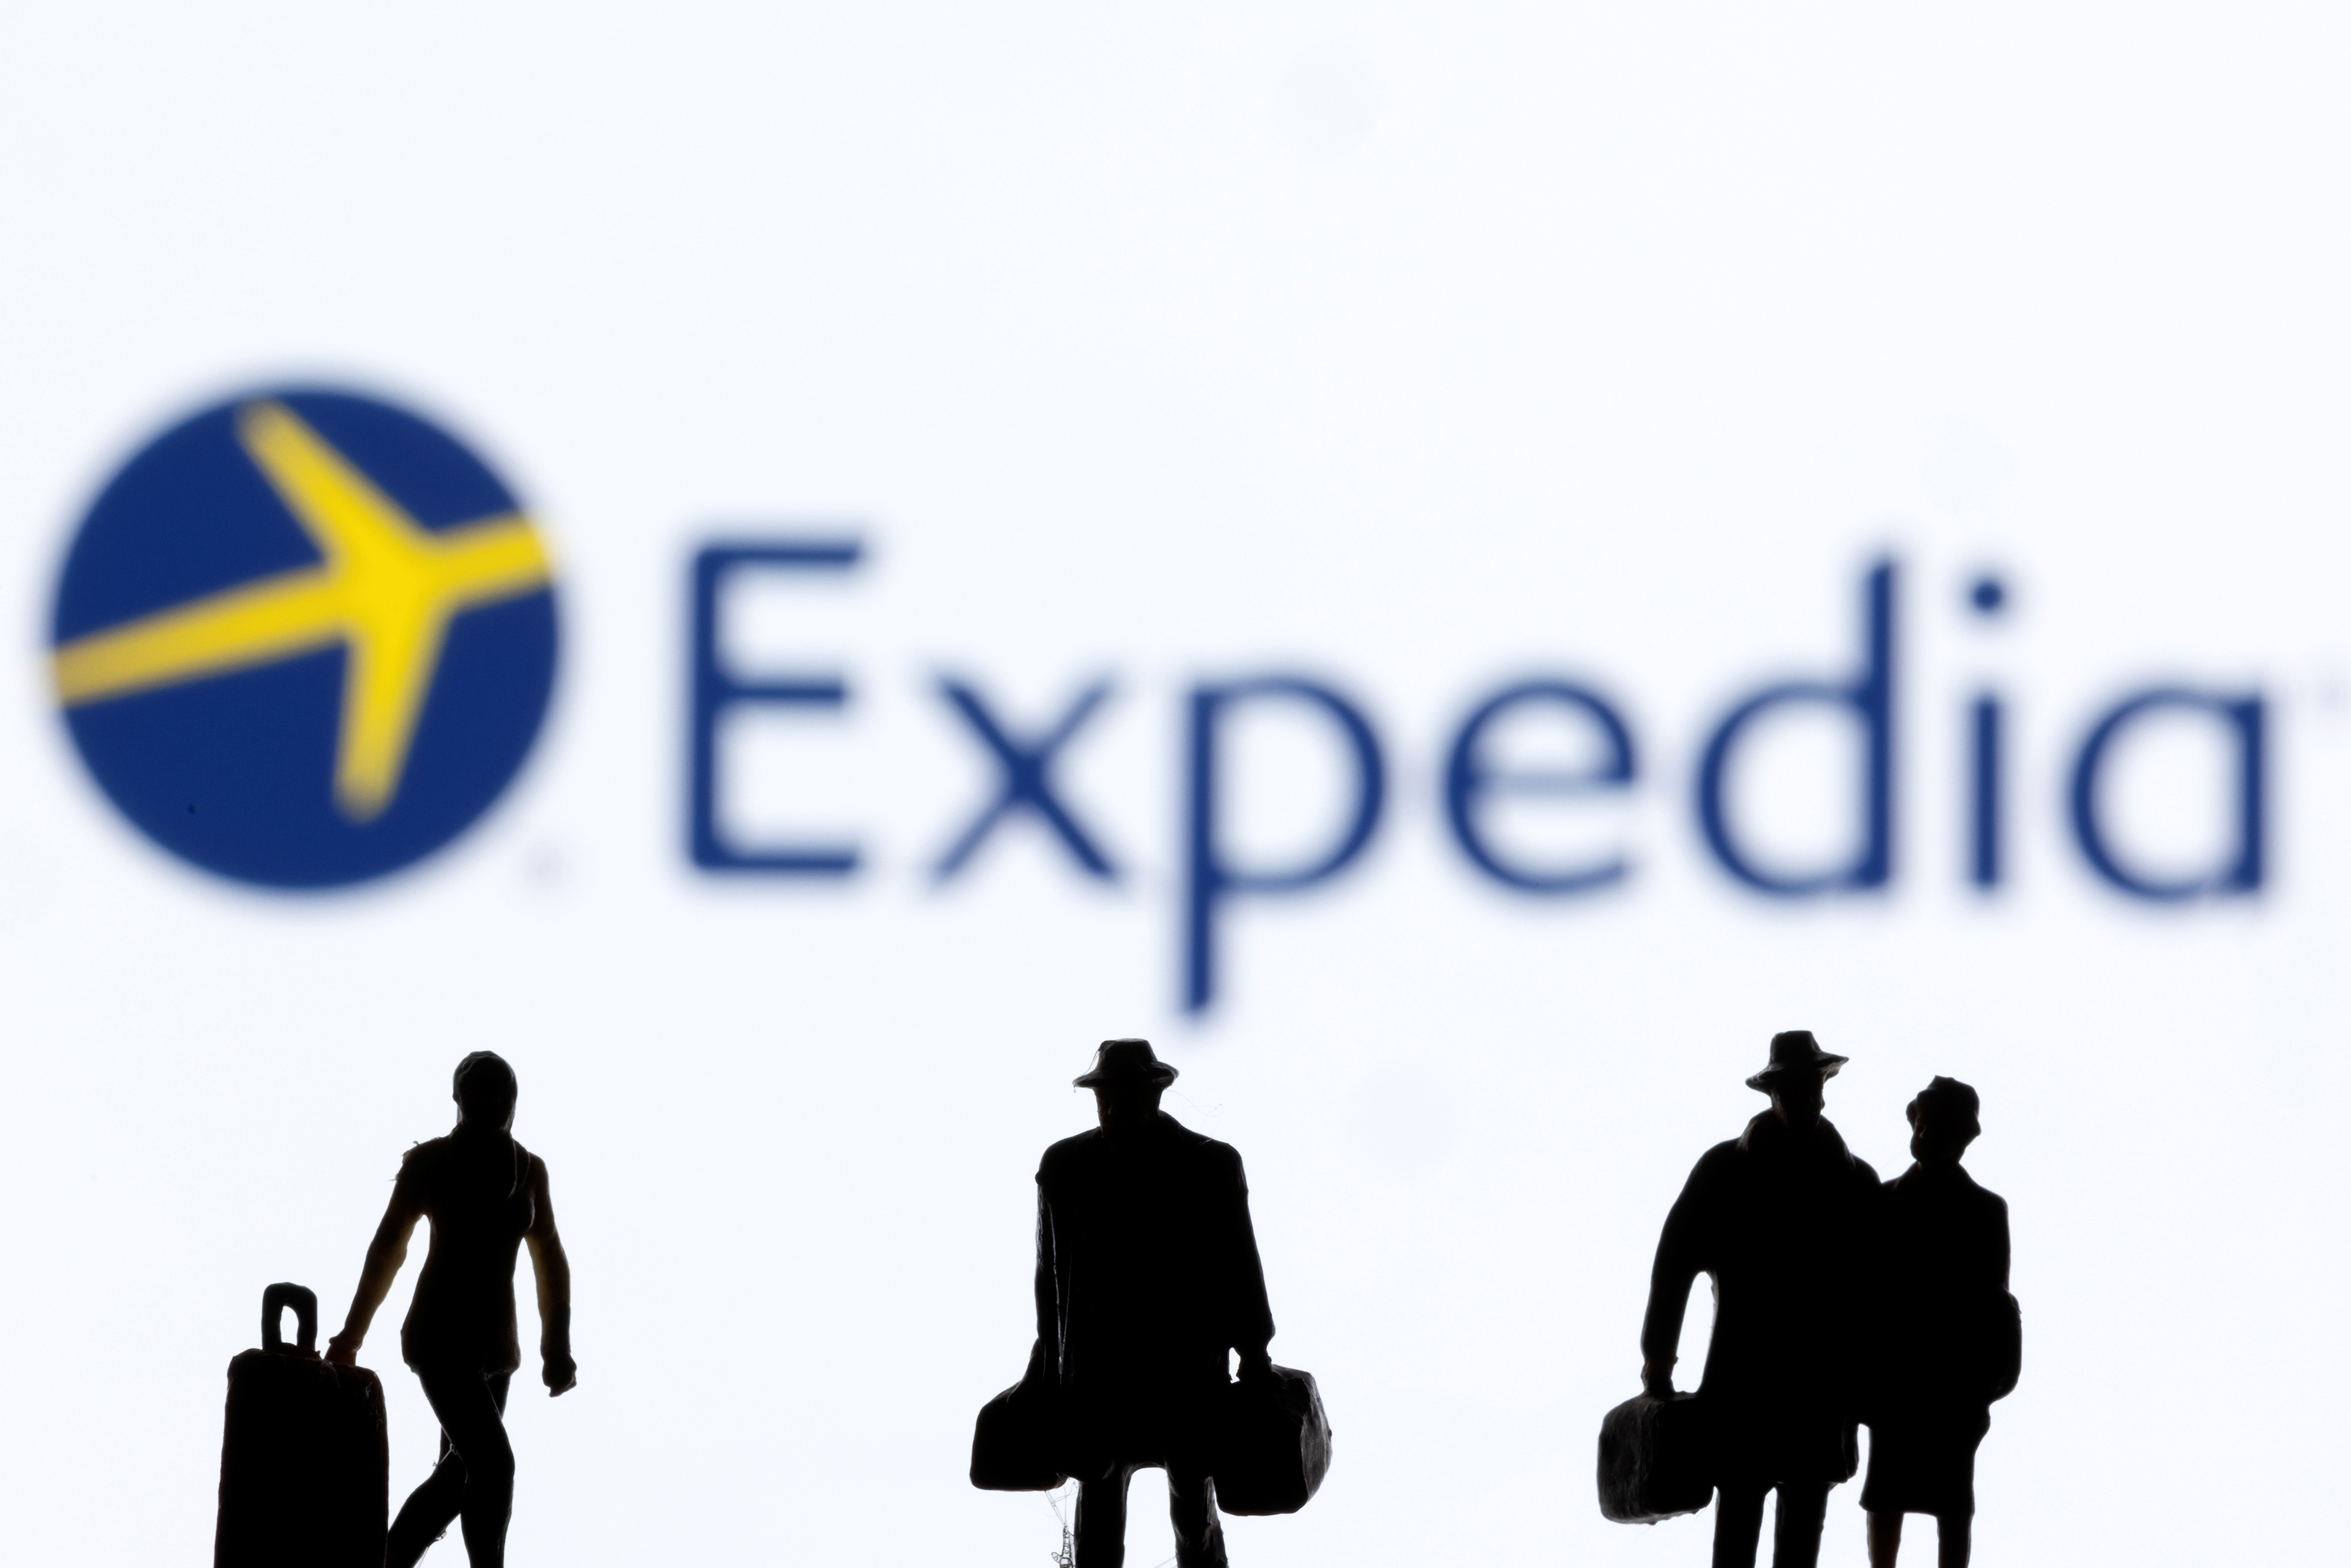 Figurines are seen in front of Expedia logo